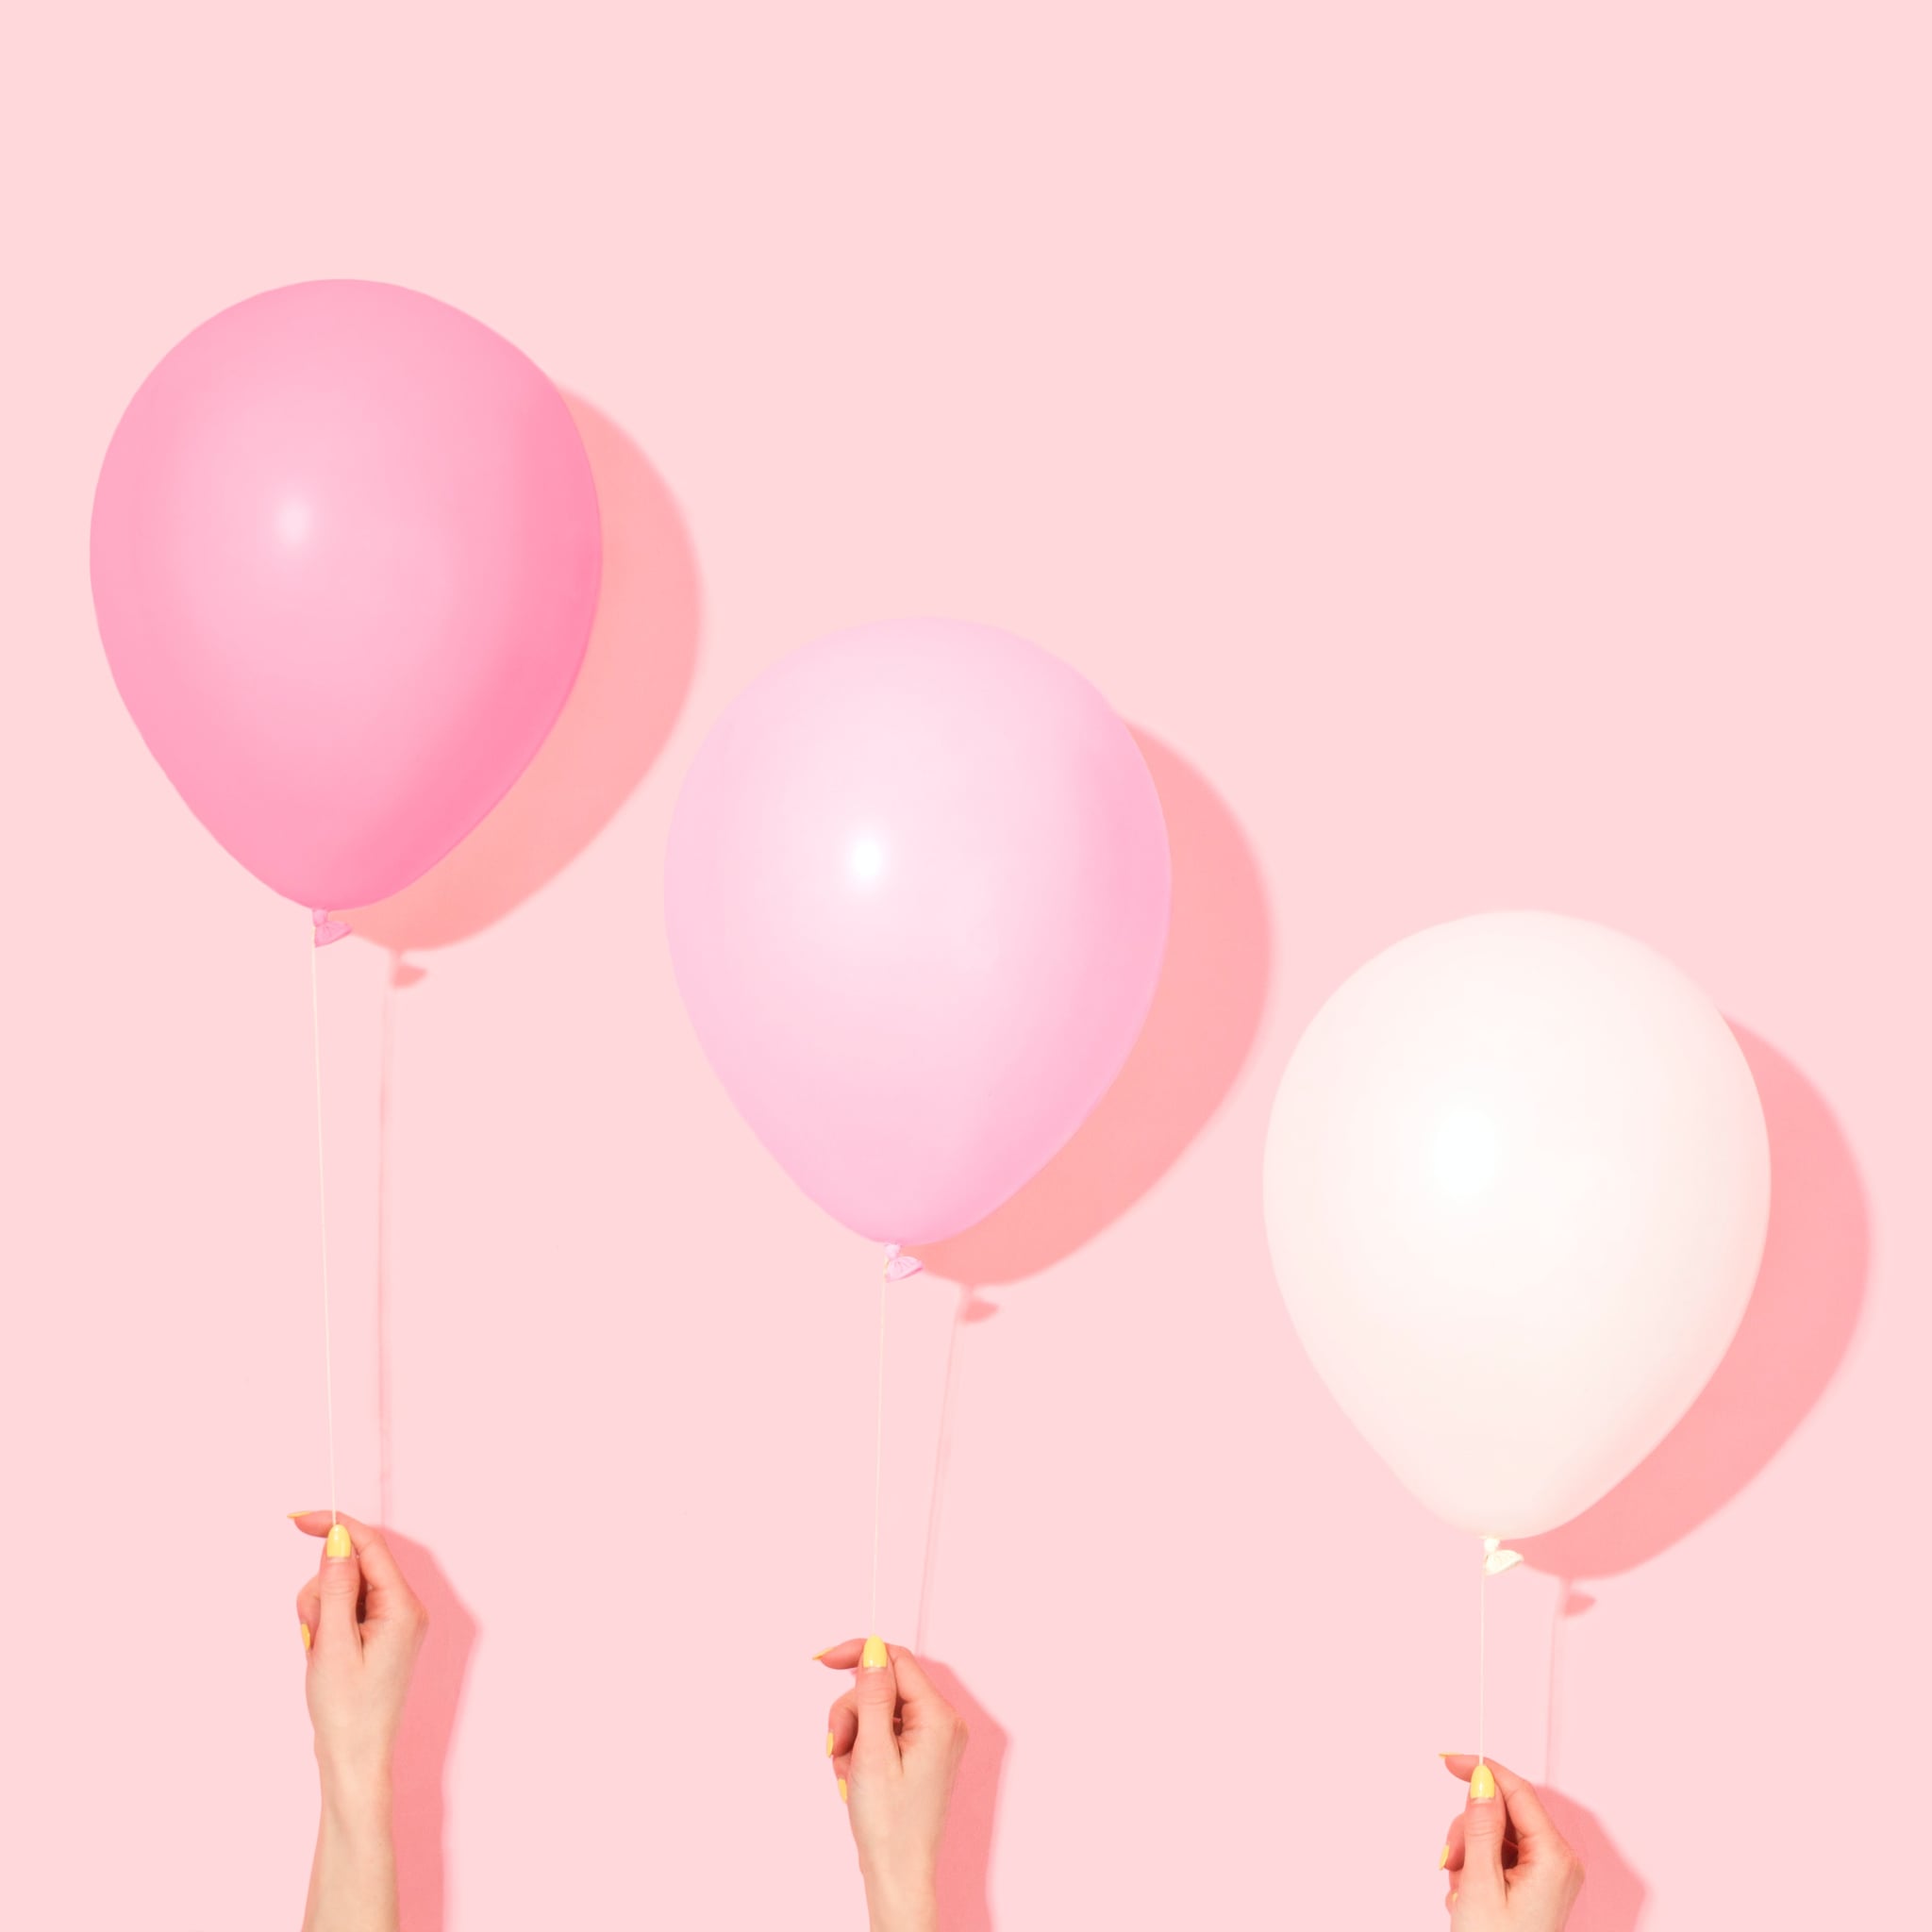 Valentine's Day Wallpaper: Pink And White Balloons. The Dreamiest IPhone Wallpaper For Valentine's Day That Fit Any Aesthetic